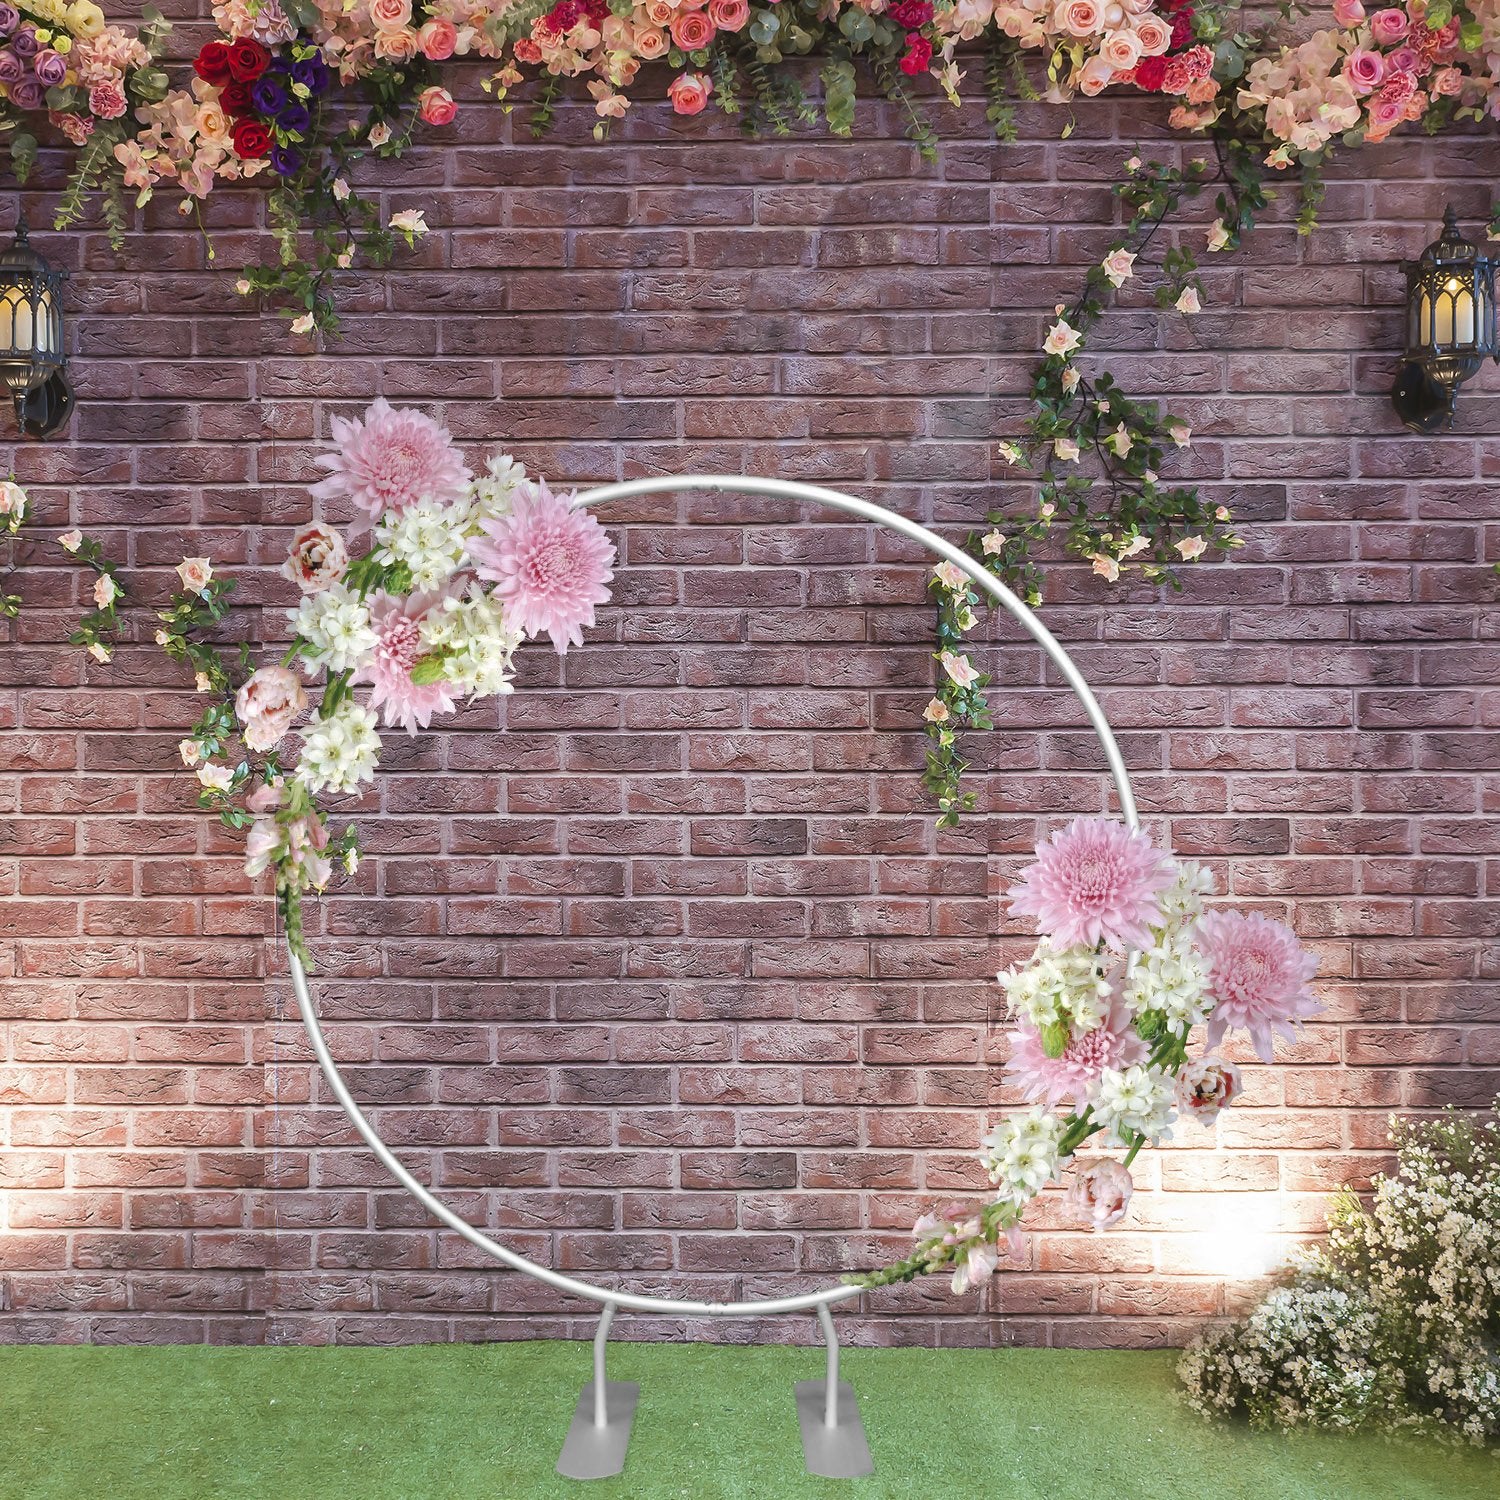 Circular Backdrop Stand ( Diameter 2m) for Wedding & Birthday Parties Decorations